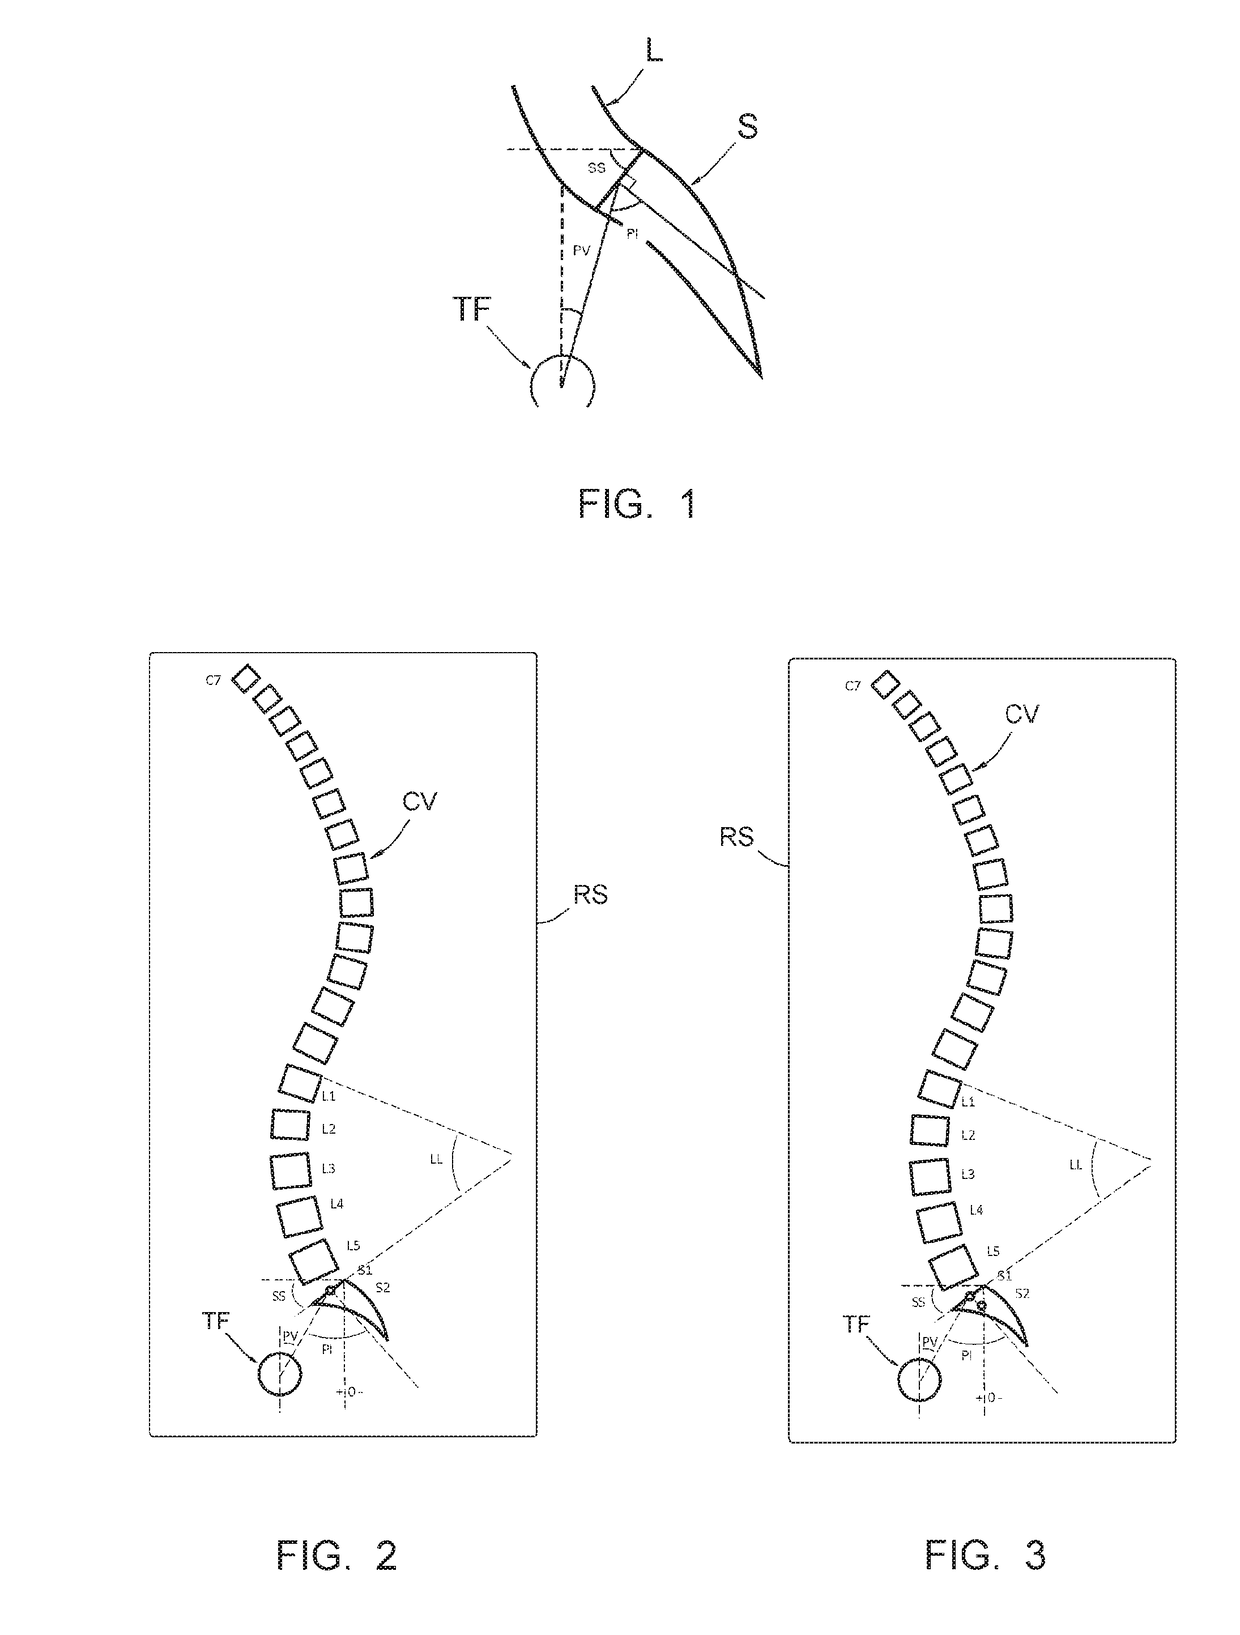 Method making it possible to produce the ideal curvature of a rod of vertebral osteosynthesis material designed to support a patient vertebral column